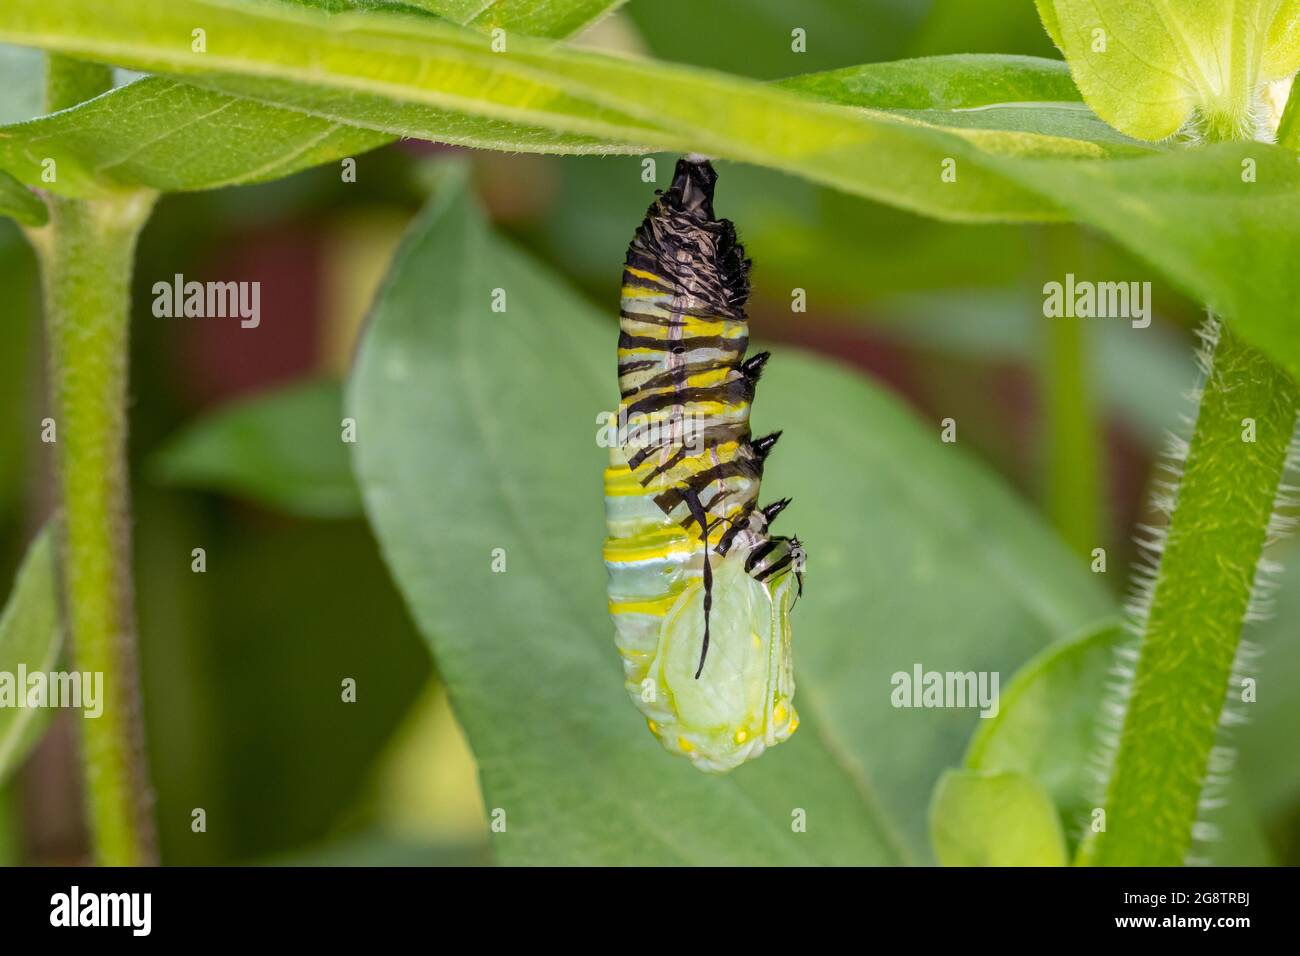 Monarch butterfly caterpillar pupating into chrysalis. Butterfly conservation, life cycle, habitat preservation, and backyard flower garden concept. Stock Photo